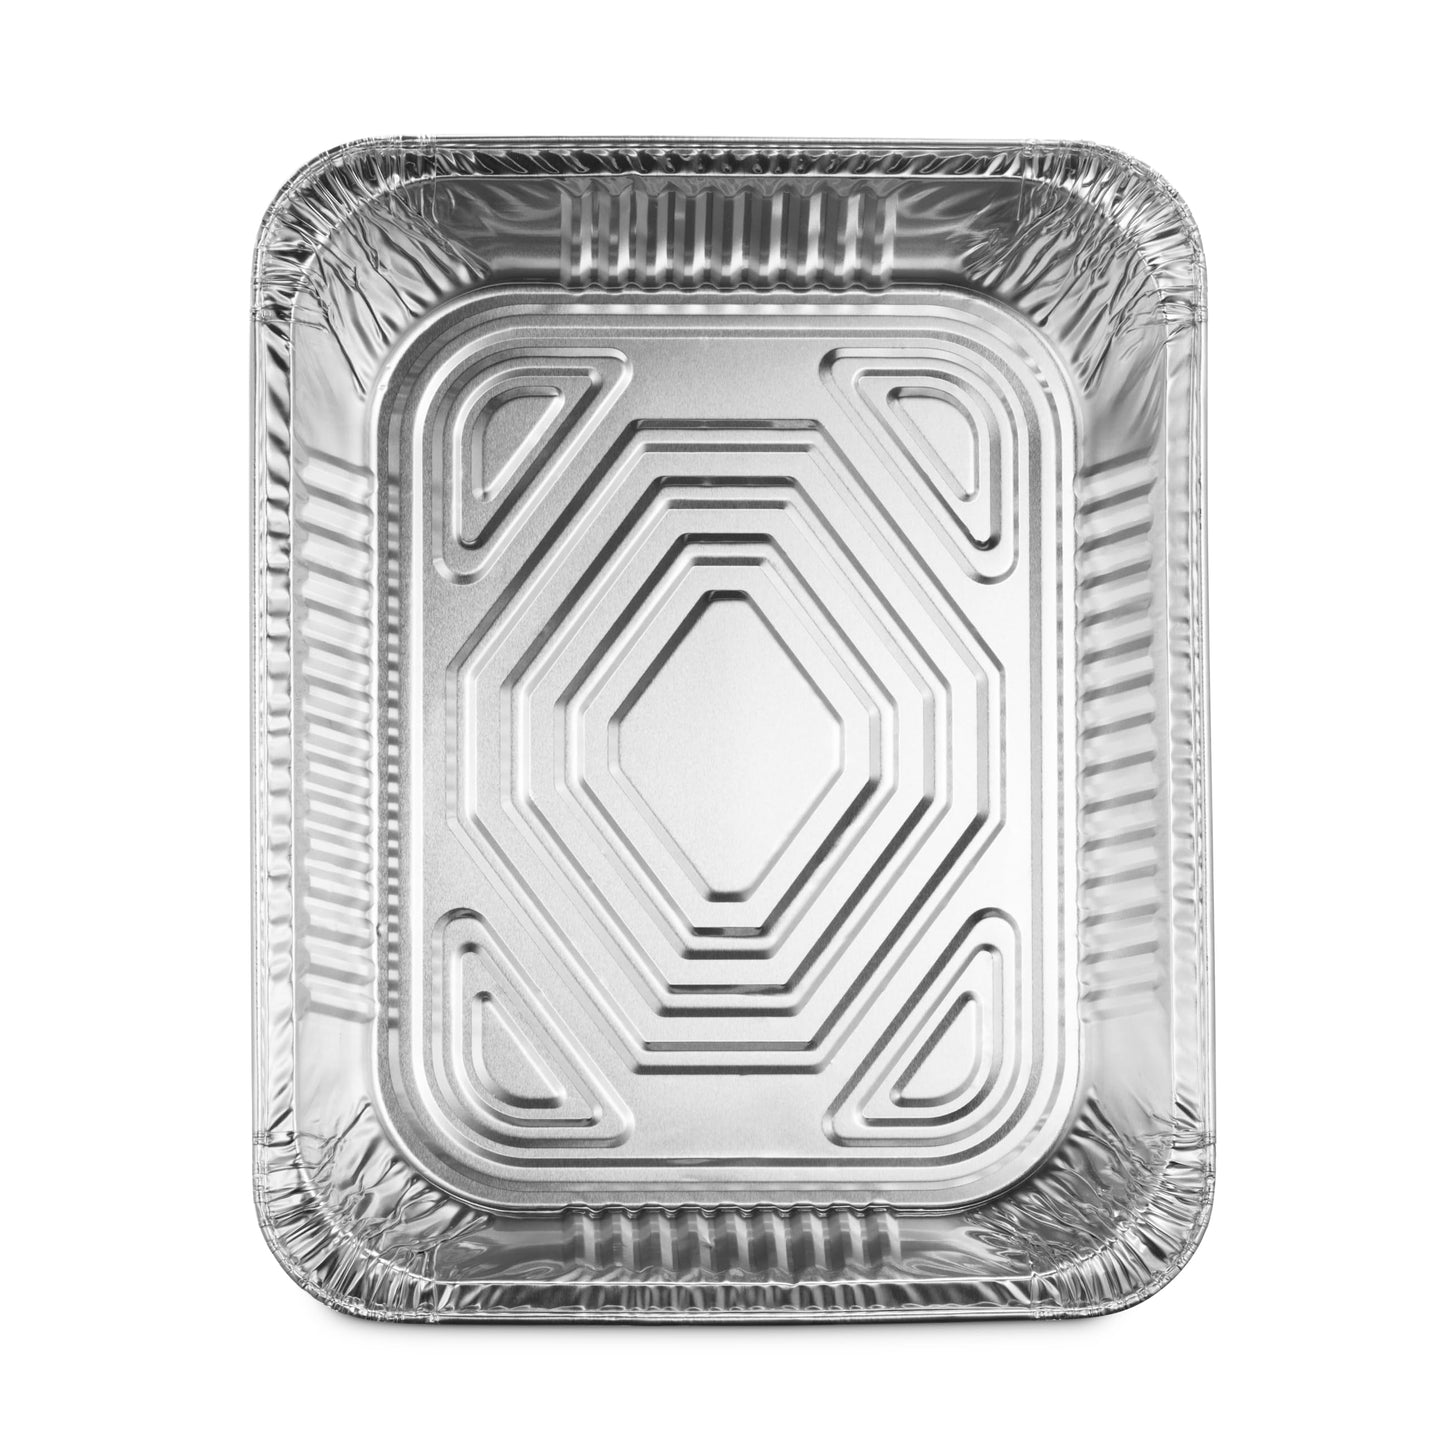 Munfix 30 Pack Aluminum Pans Disposable 9x13 Baking Pan Chafing Trays - Deep Half Size Oven Steam Table Tin Foil Pans - Extra Heavy Duty Foil Pans for Heating, Roasting, Cooking, Storing Food